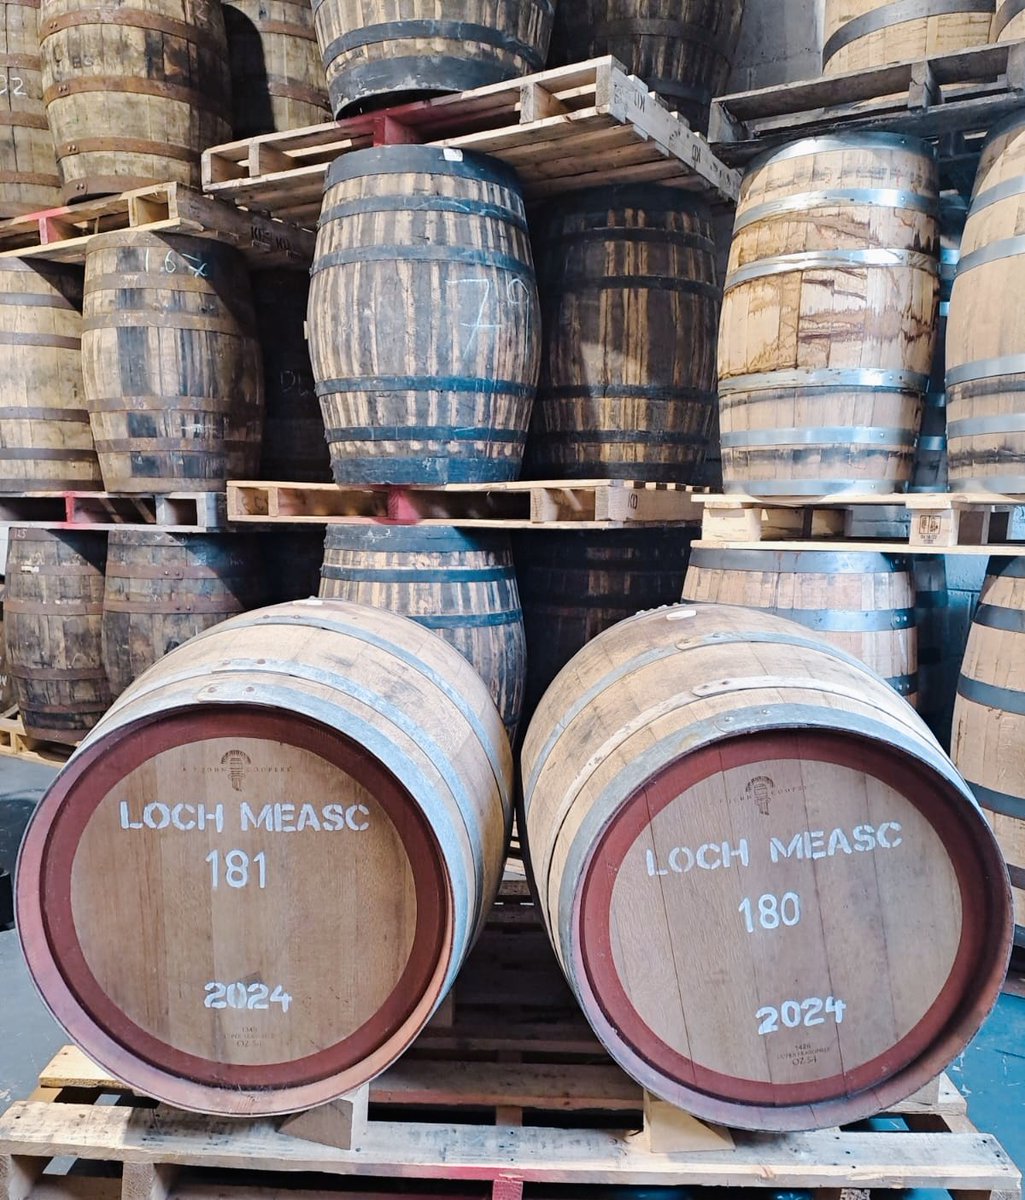 Our bonded warehouse is filling up fast with the most beautiful casks from around the world 🌎 🥃
To check out our 2024 cask offering click on  loughmaskdistillery.com 
#irishwiskey #smallbatch #singlemalt #lovemayo #wildatlanticway